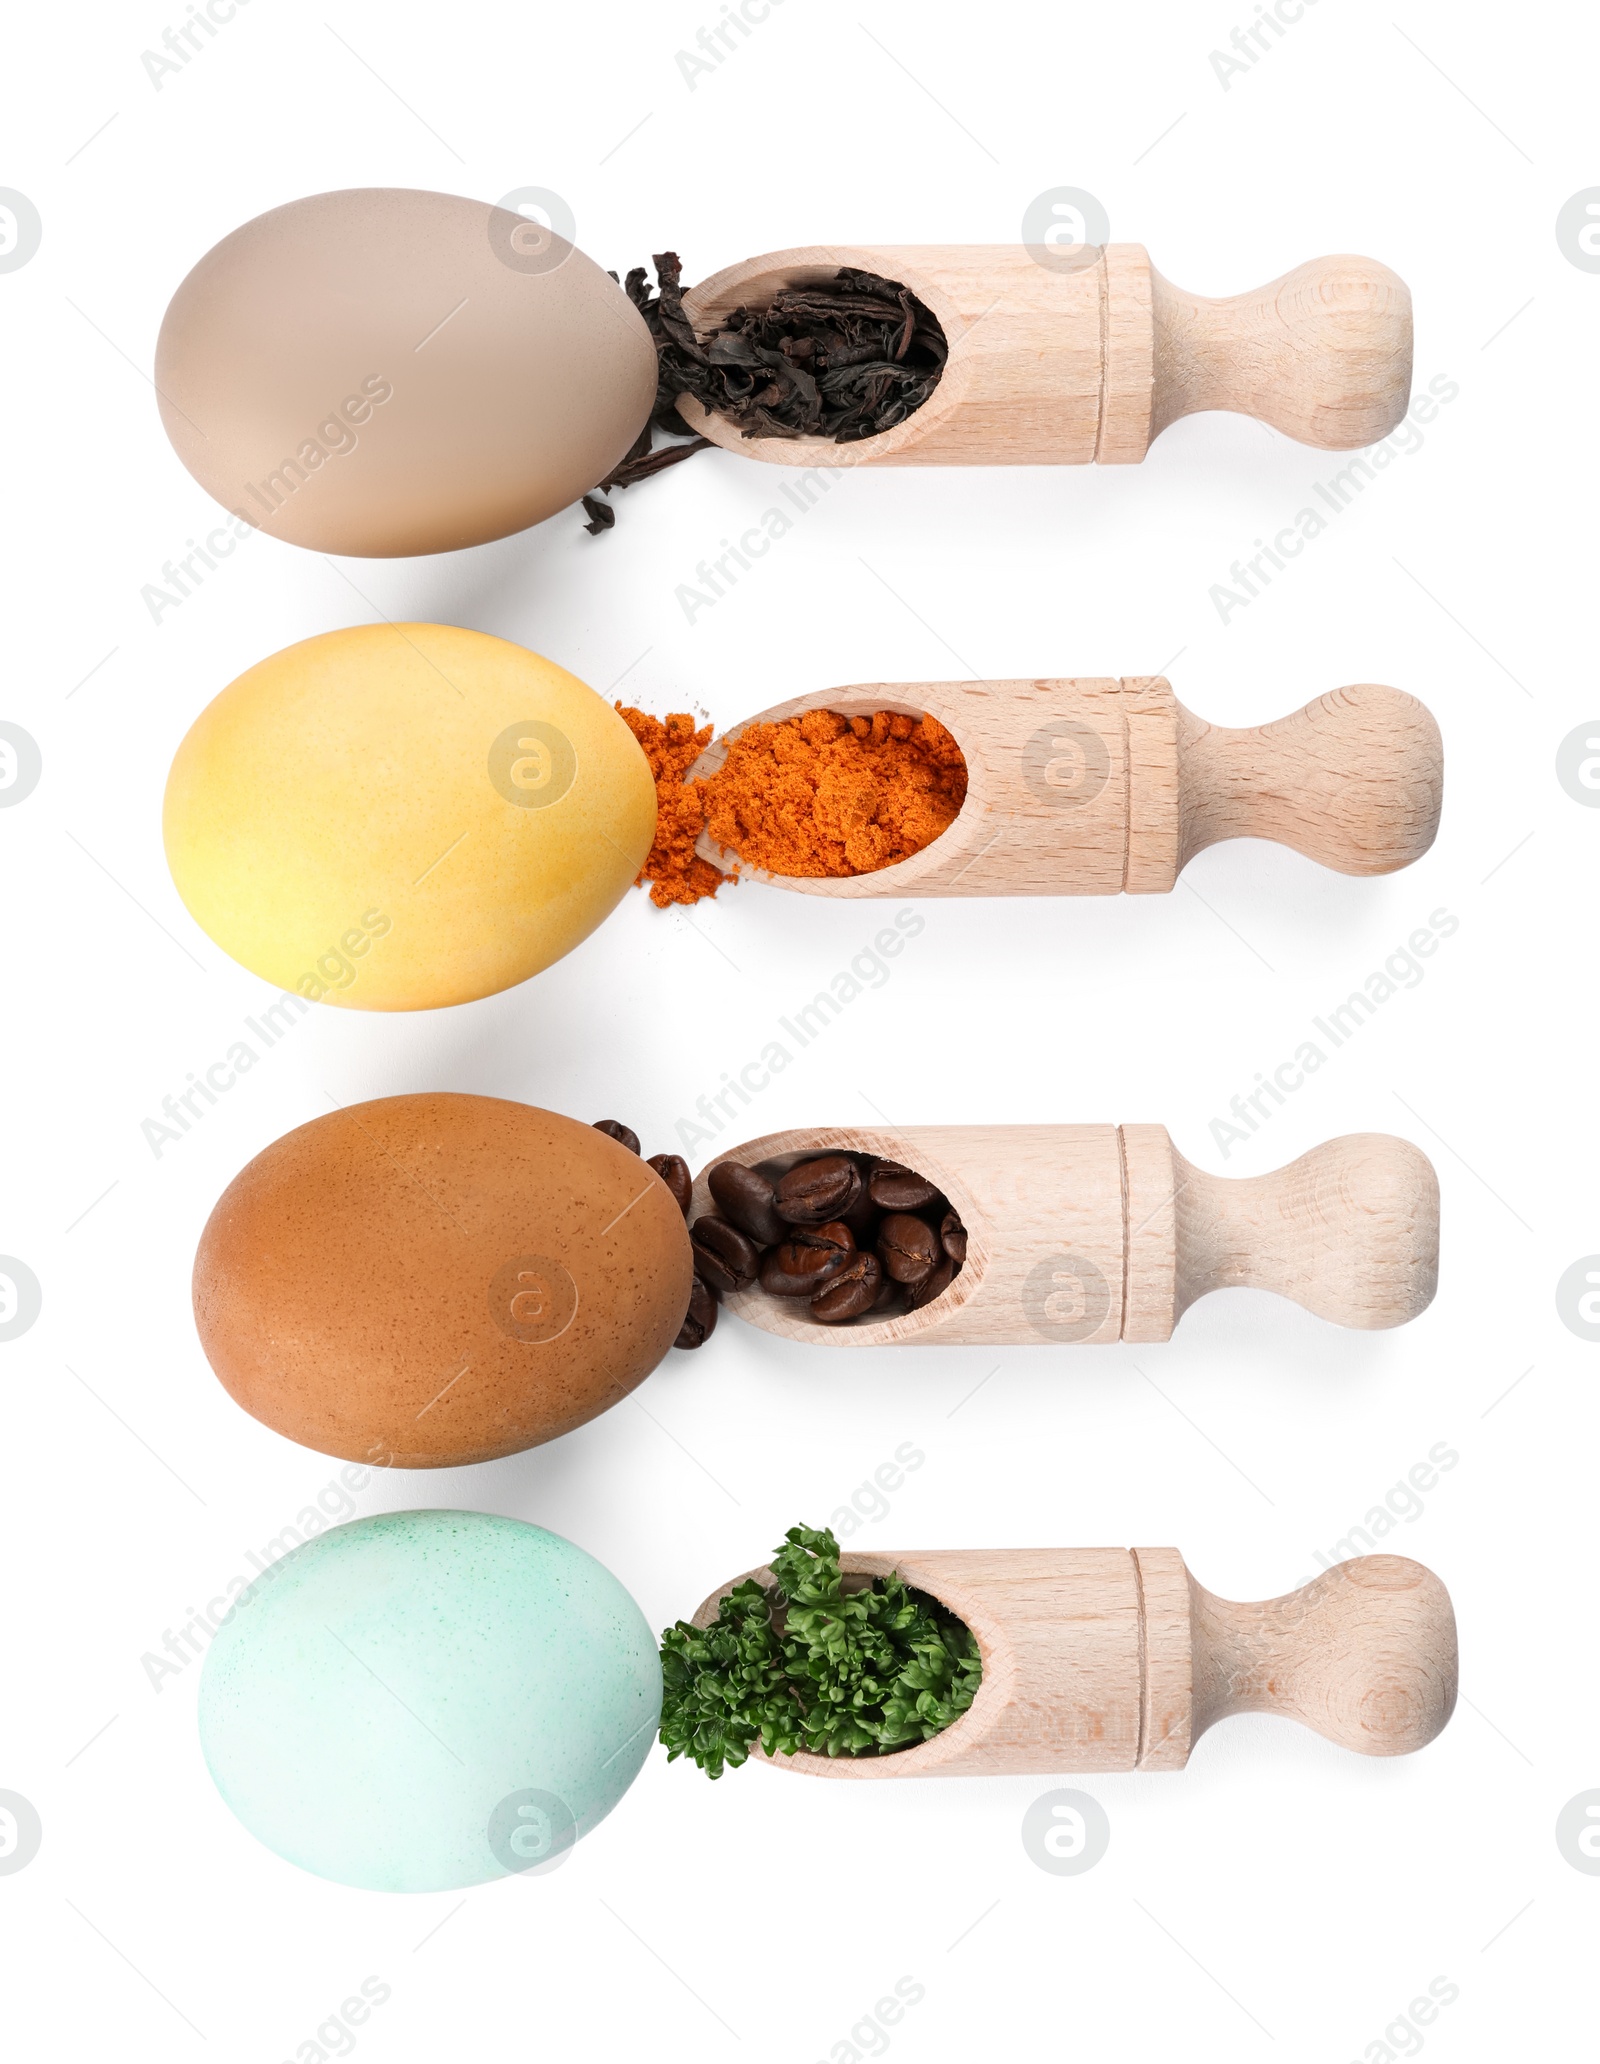 Photo of Naturally painted Easter eggs on white background, top view. Tea, turmeric, coffee beans and parsley used for coloring